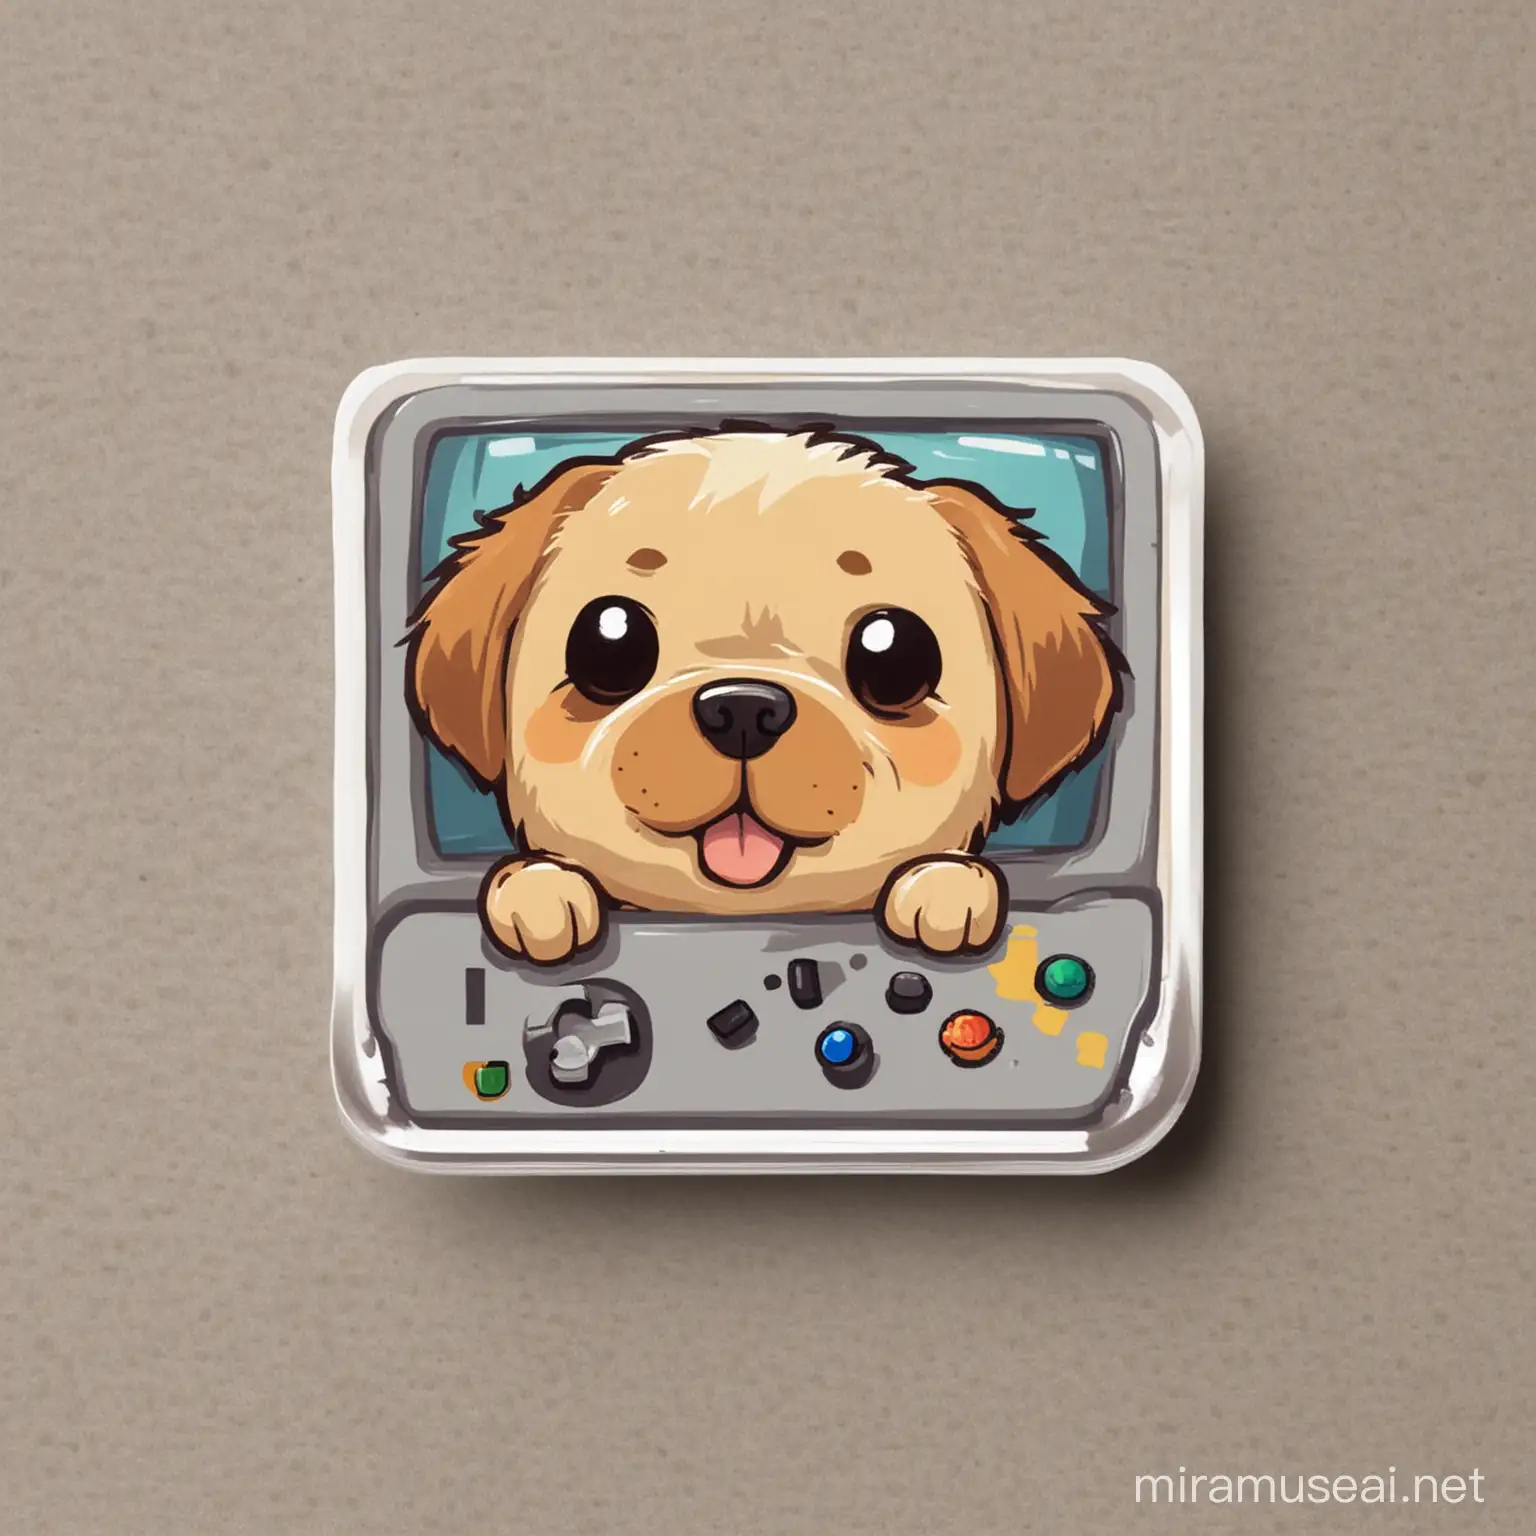 give me a sticker of a dog playing video games
